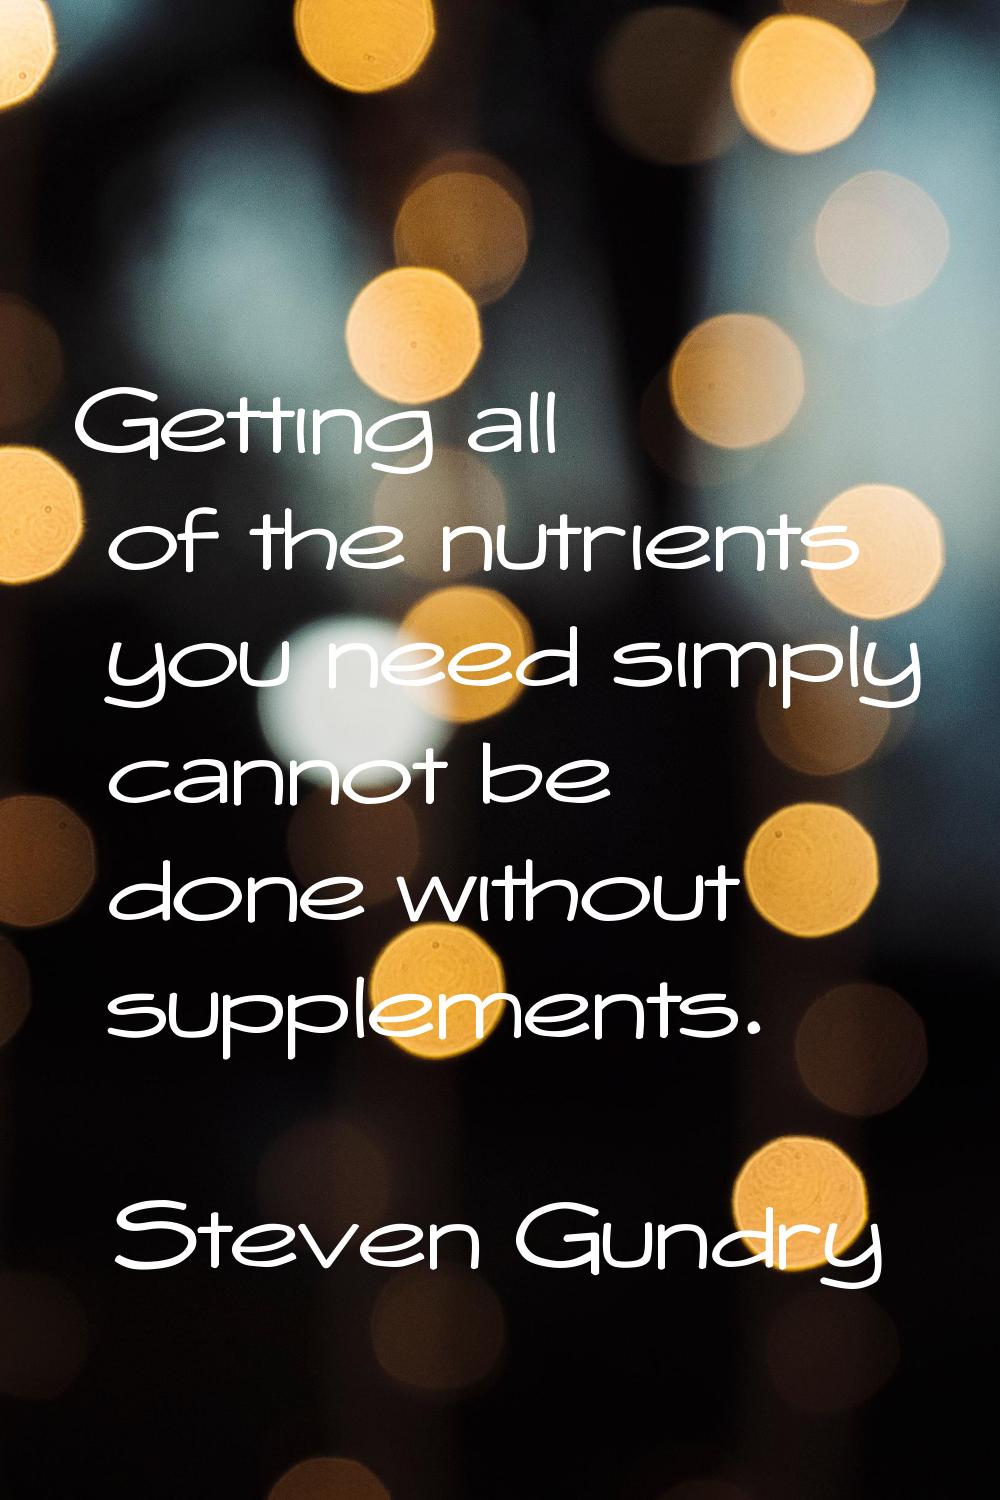 Getting all of the nutrients you need simply cannot be done without supplements.